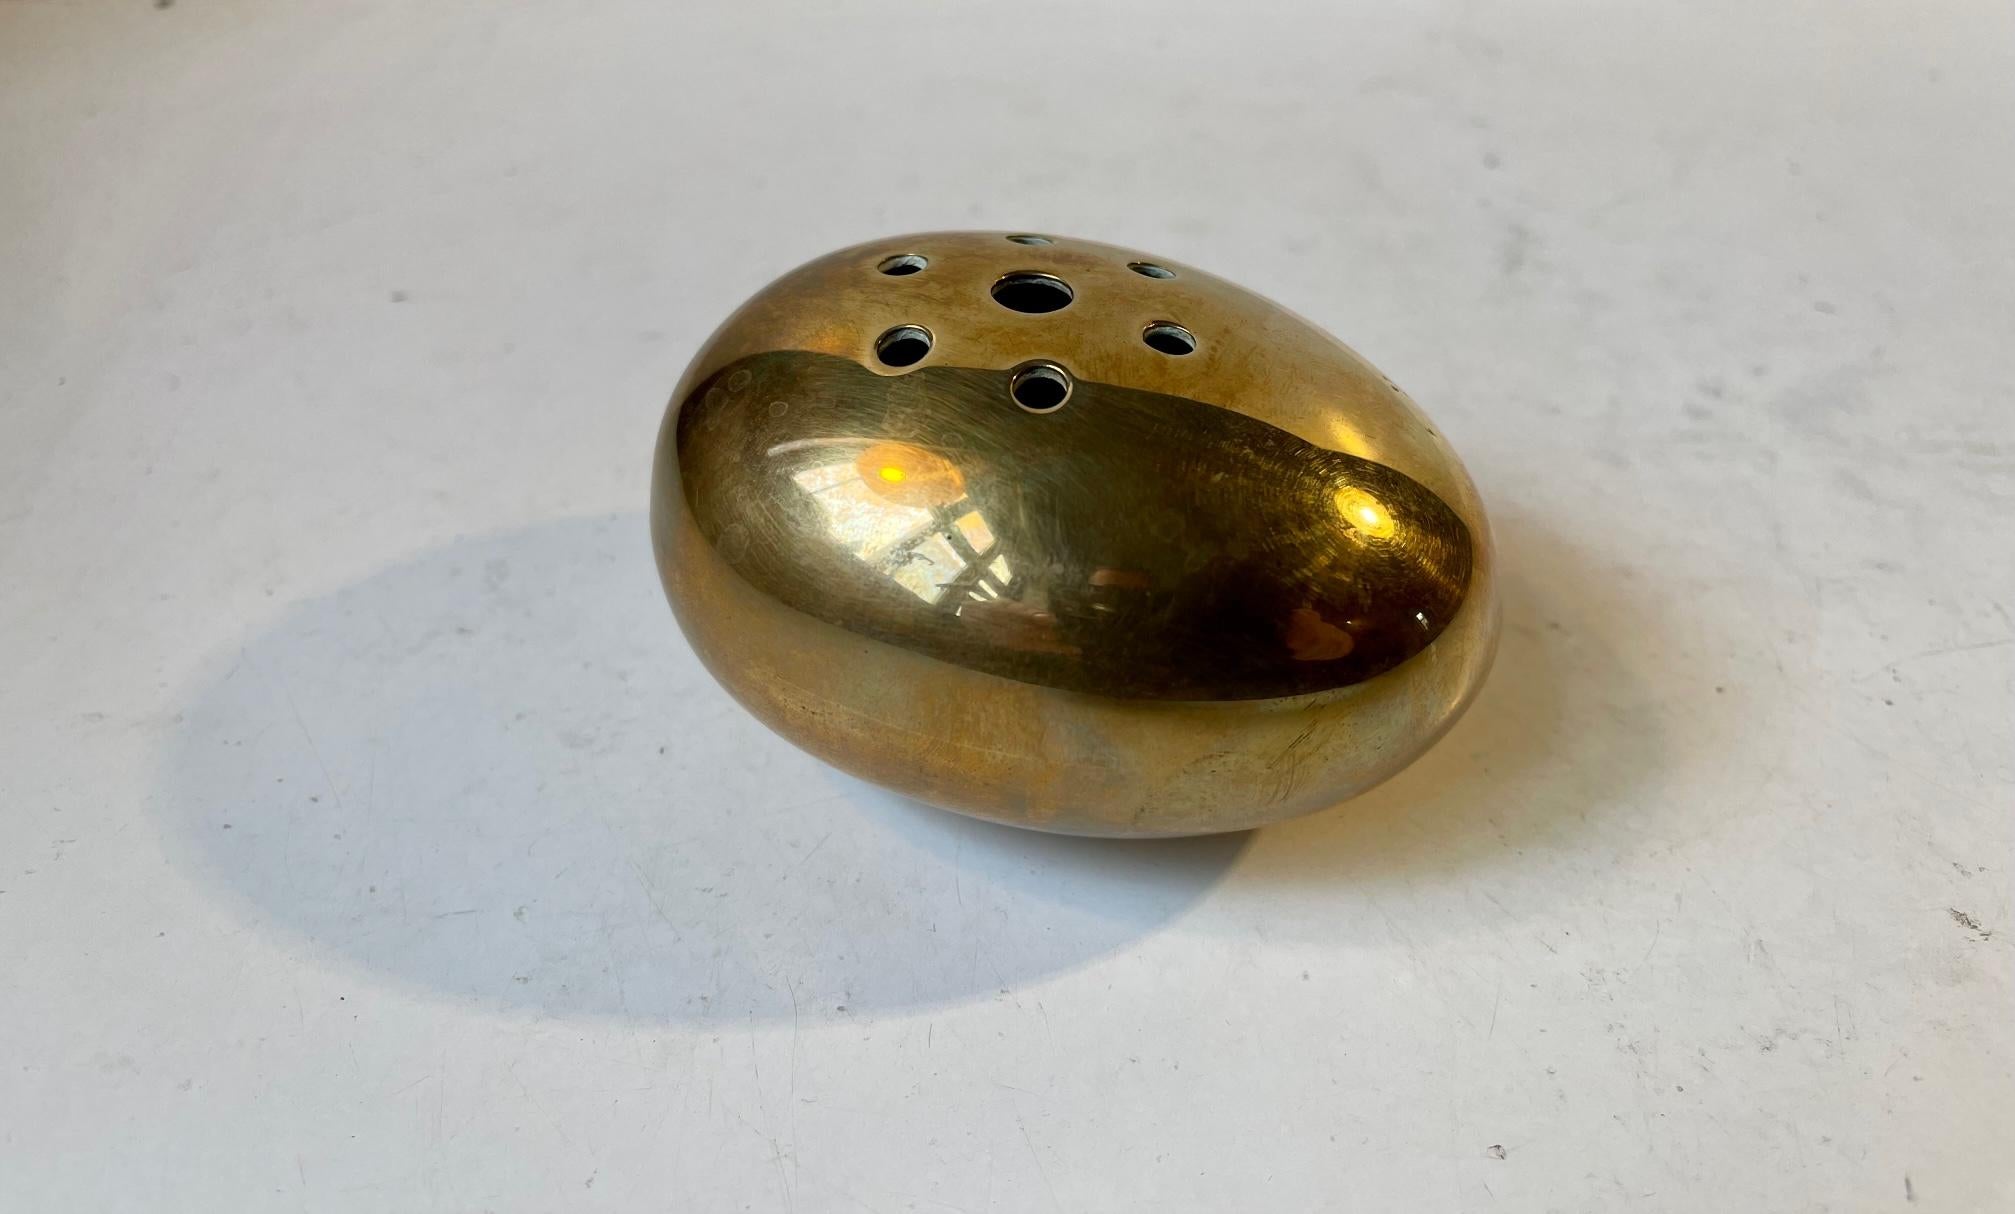 Egg shaped solid brass vase for 7 single flowers. Designed by silversmith Hans Bunde and manufactured by Cohr in Denmark during the 1960s. Stamped Cohr - Denmark to the underside. Measurements: 6 x 9.5 x 7 cm.